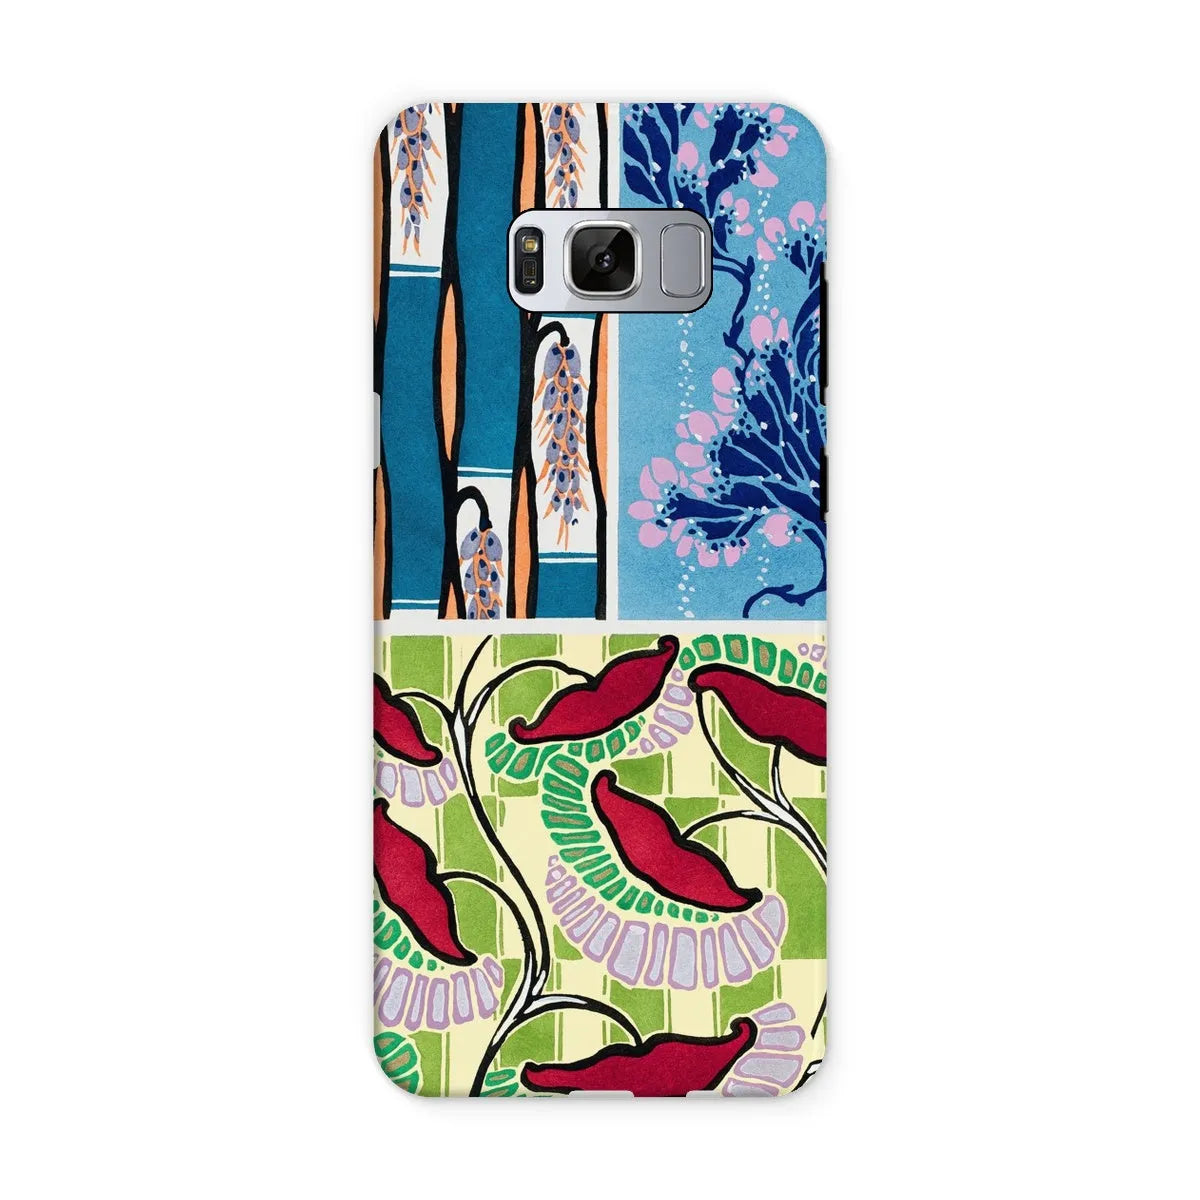 Floral Kitsch Aesthetic Art Phone Case - E.a. Séguy - Samsung Galaxy S8 / Matte - Mobile Phone Cases - Aesthetic Art